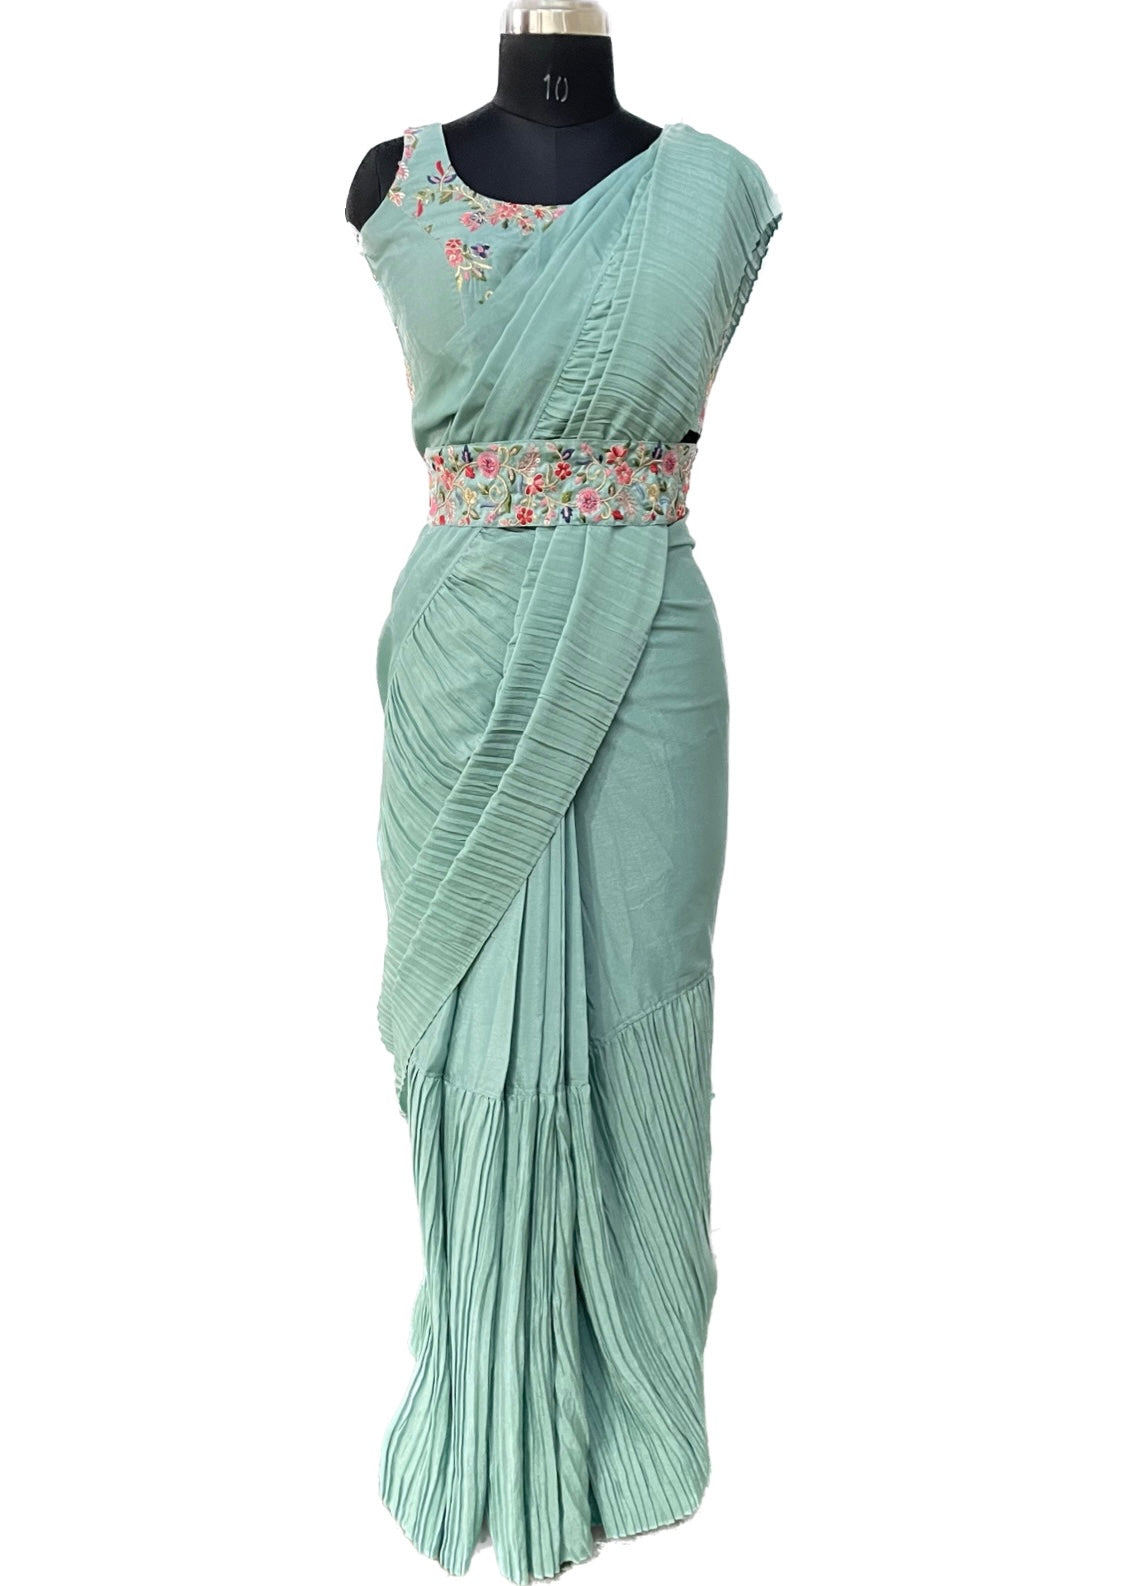 Pre-stitched Pleated Teal Saree, Blouse, and Belt (Set)